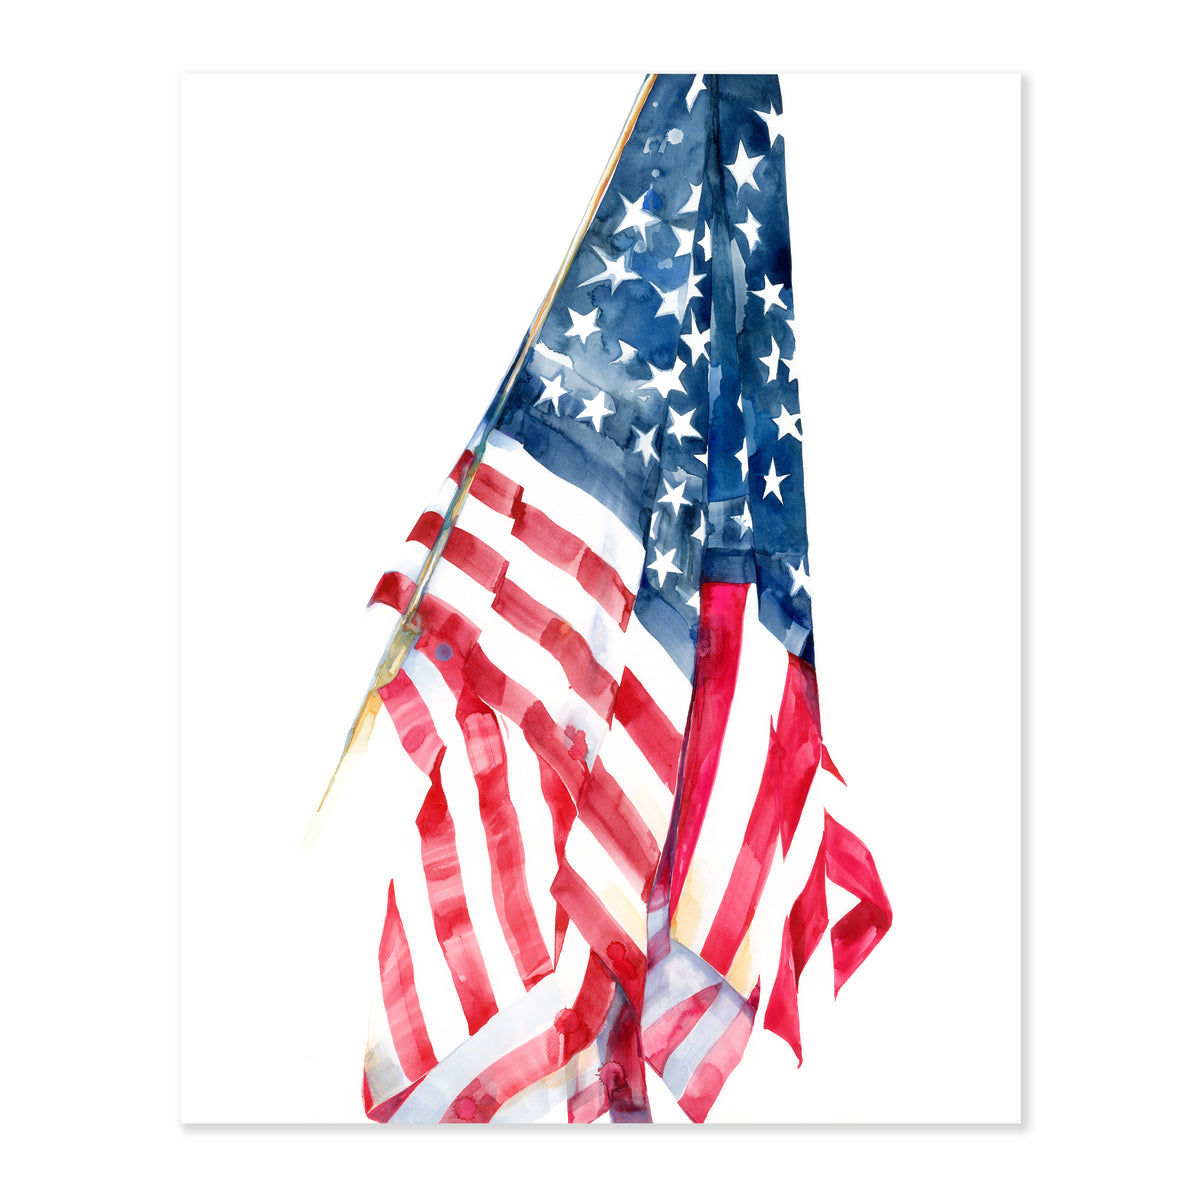 A fine art print illustrating a draped united states flag featuring red white and blue in watercolor on a soft white background